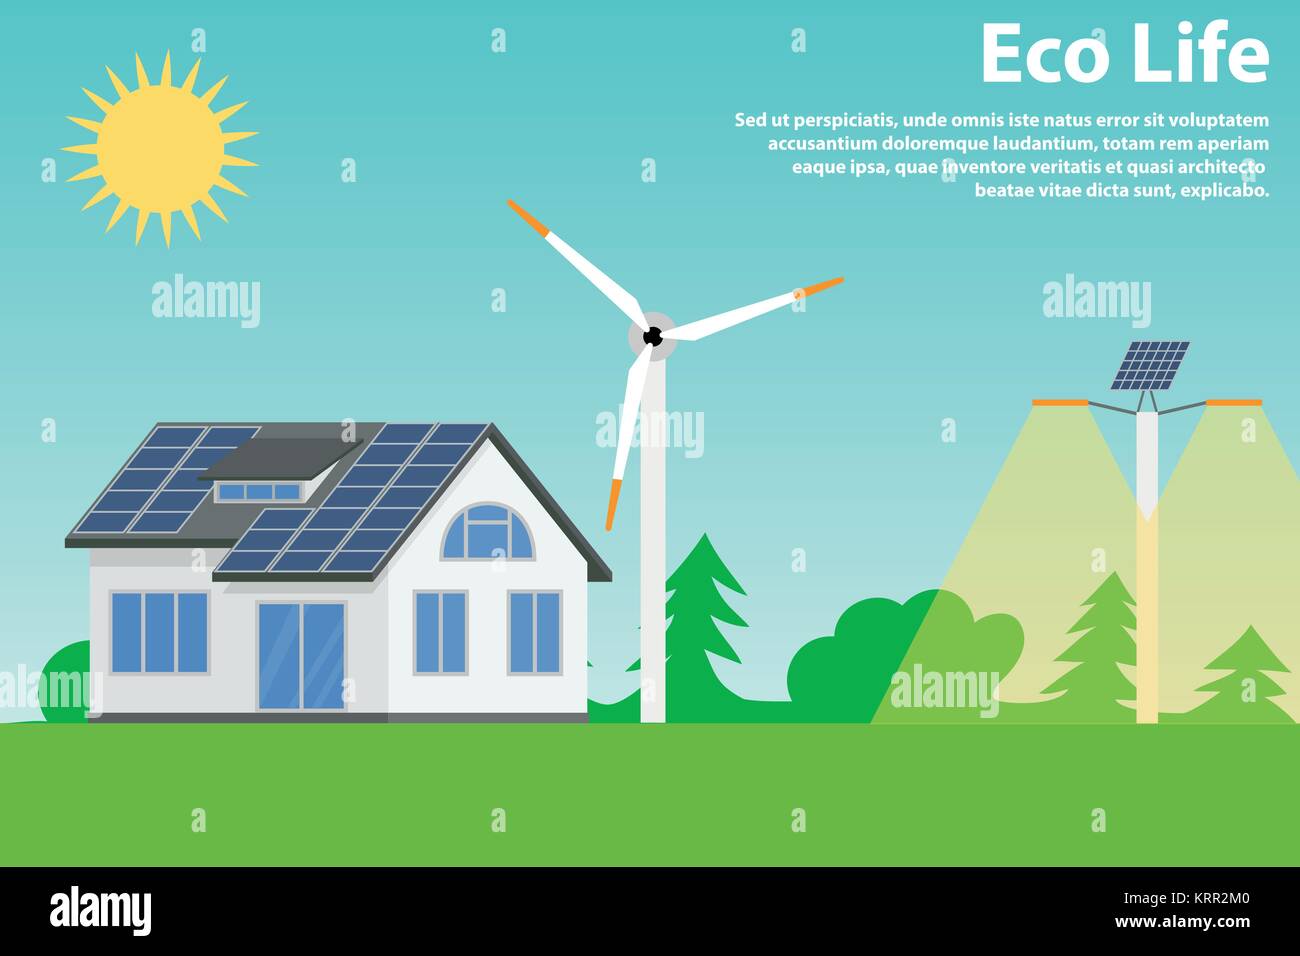 Preserving the environment and using renewable energy sources - solar and wind. Eco house and street lighting. Stock Vector